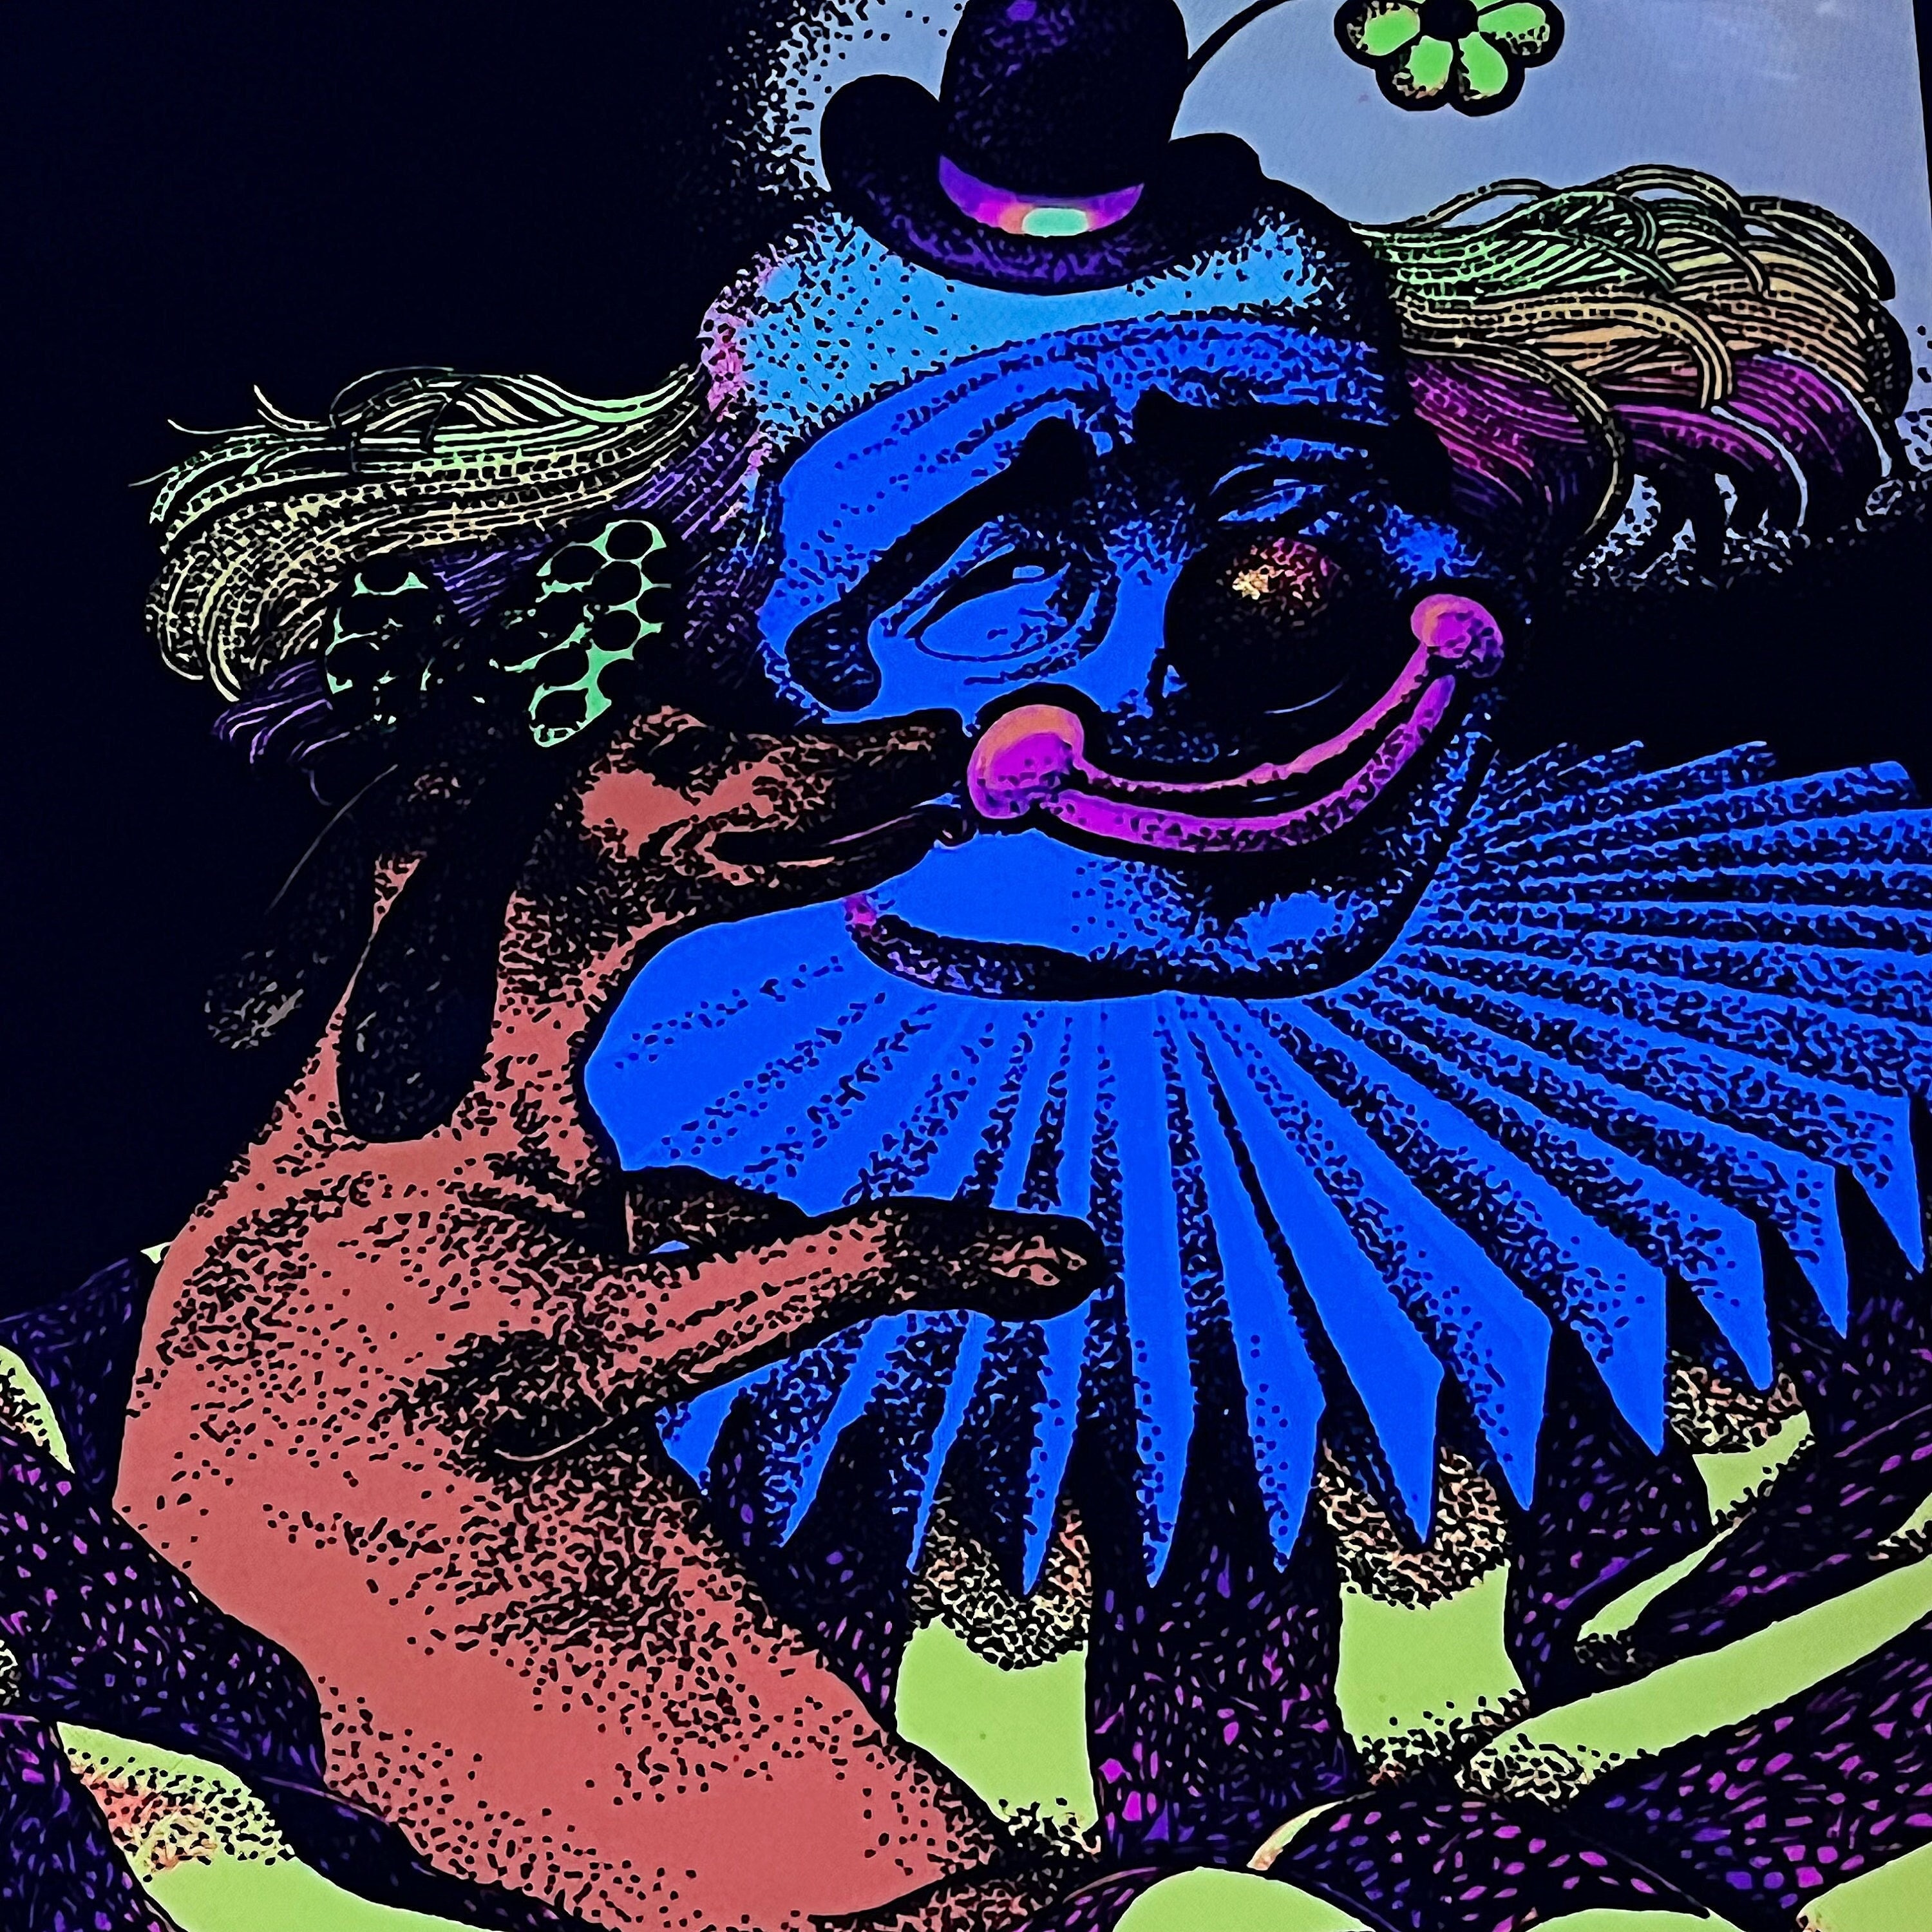 RARE vintage 1970s blacklight stoner posters - collectibles - by